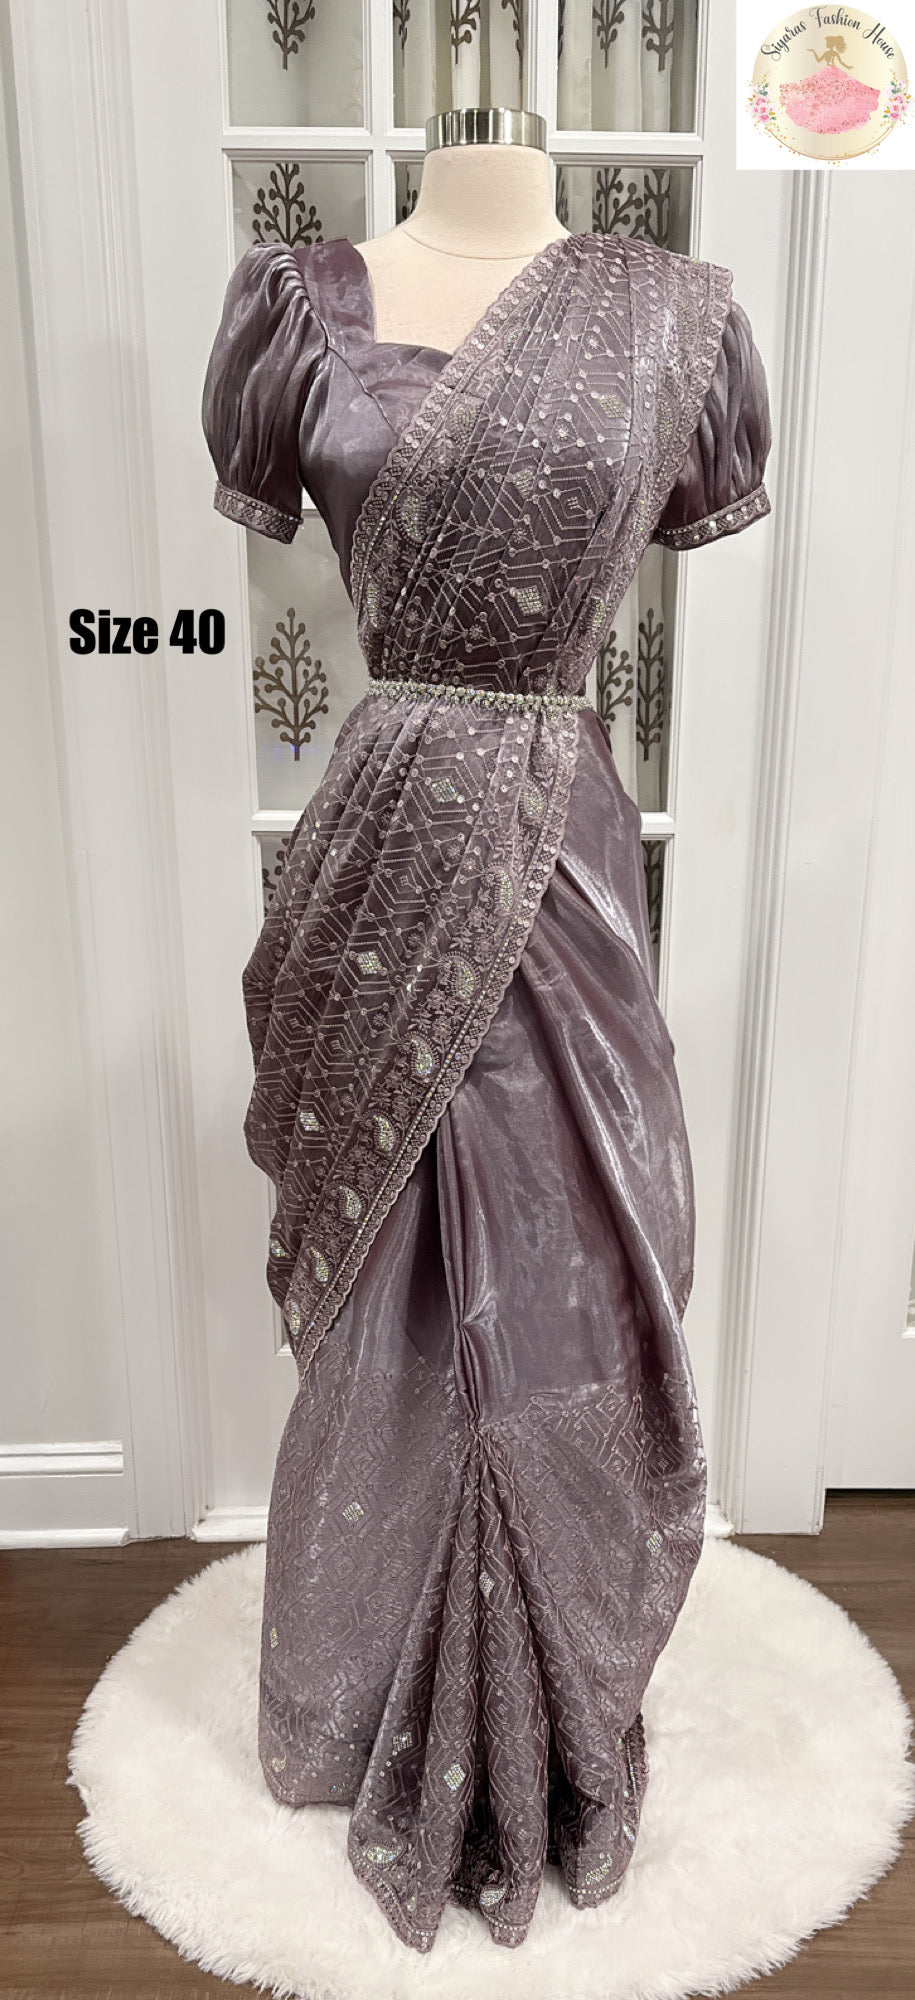 Partywear Saree in premium organza fabric with puff sleeves